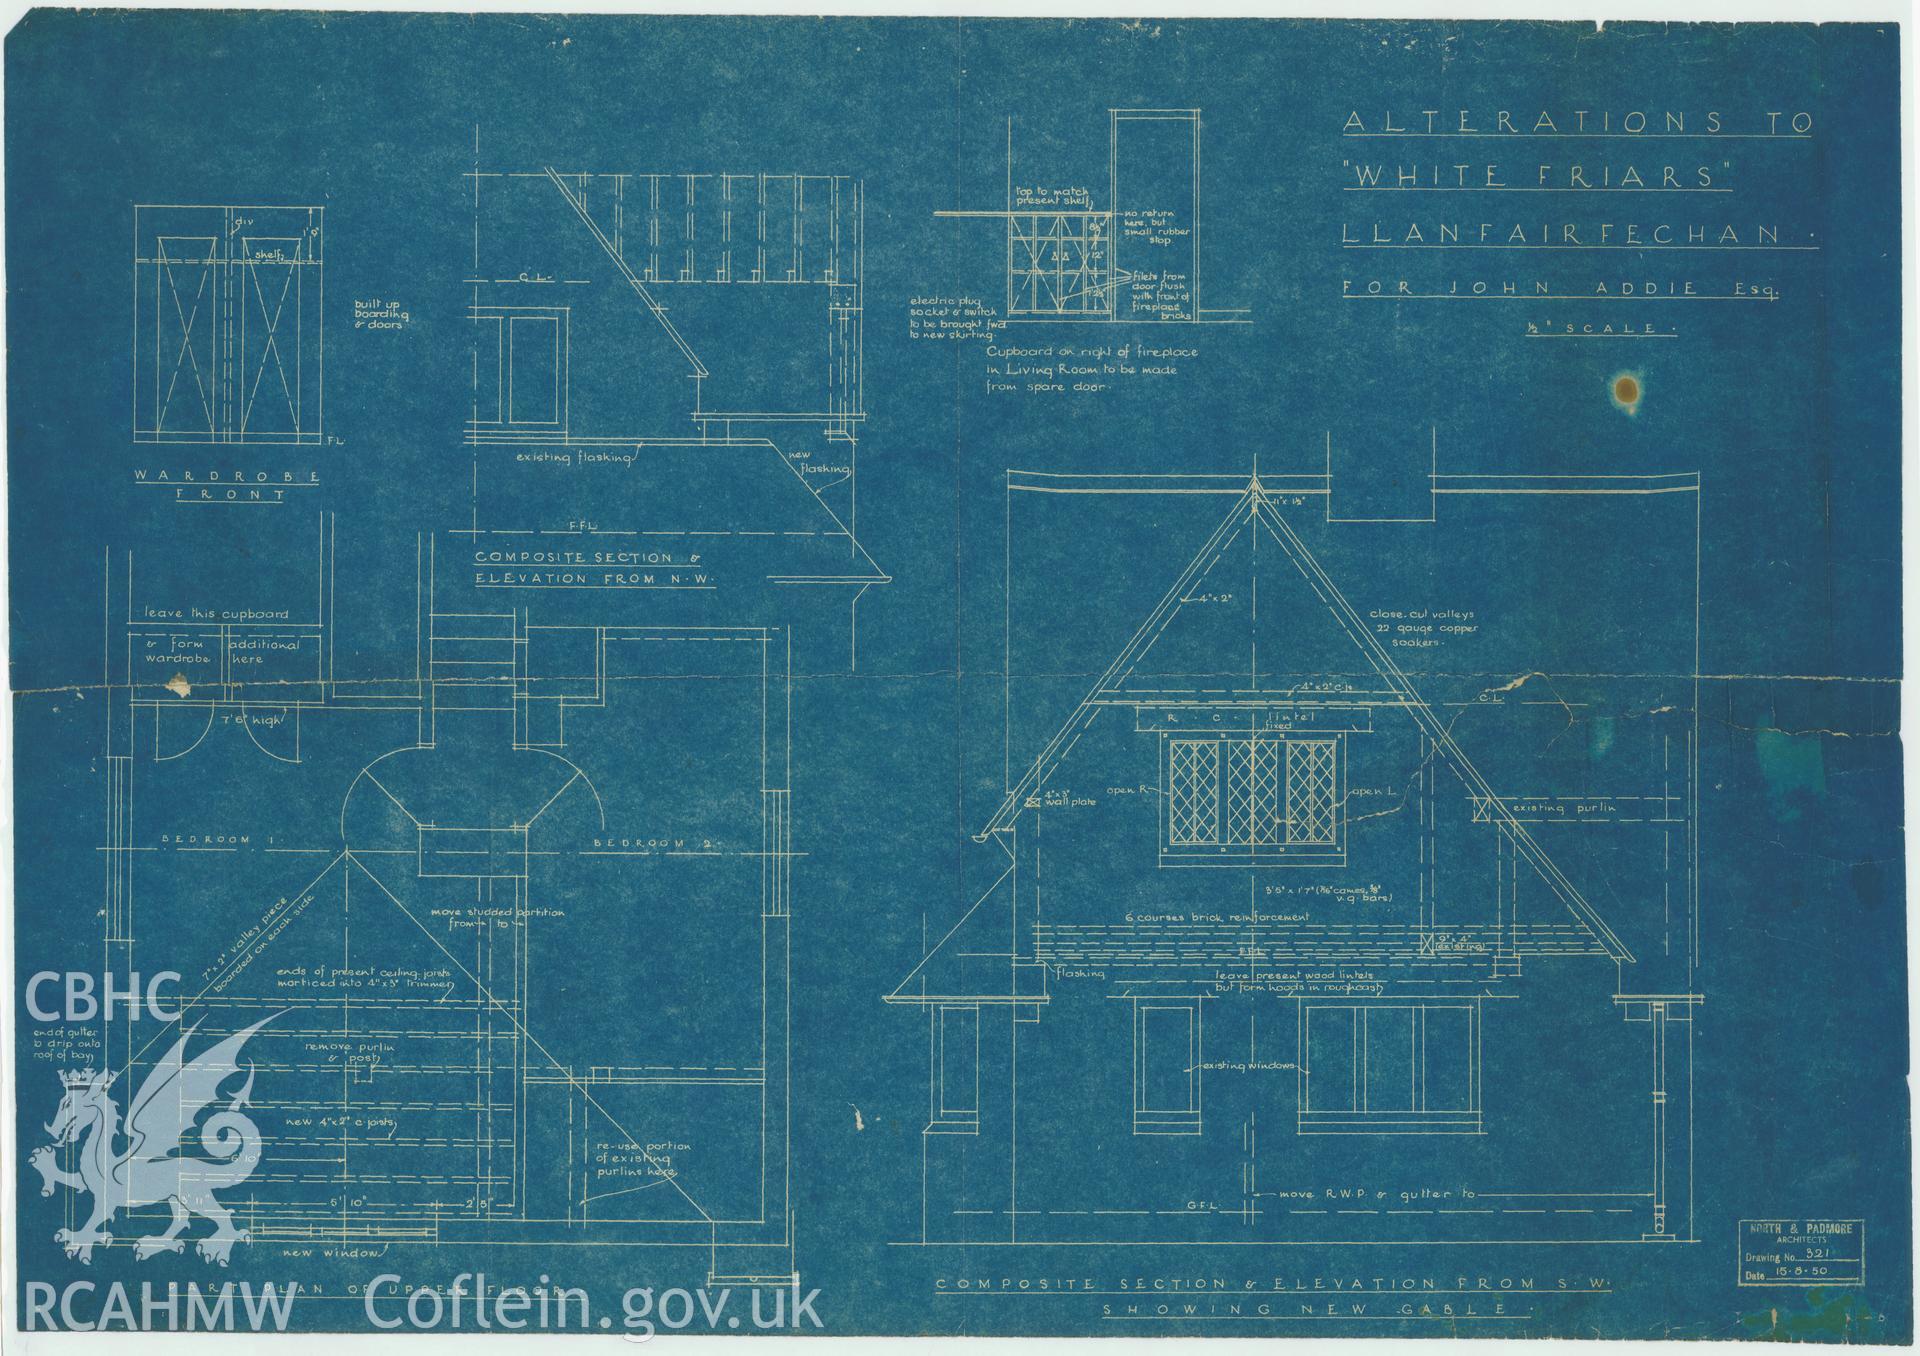 Blue-print plan, and composite sections and elevations relating to Whitefriars, West Shore, Llanfairfechan, Conwy: Alterations.